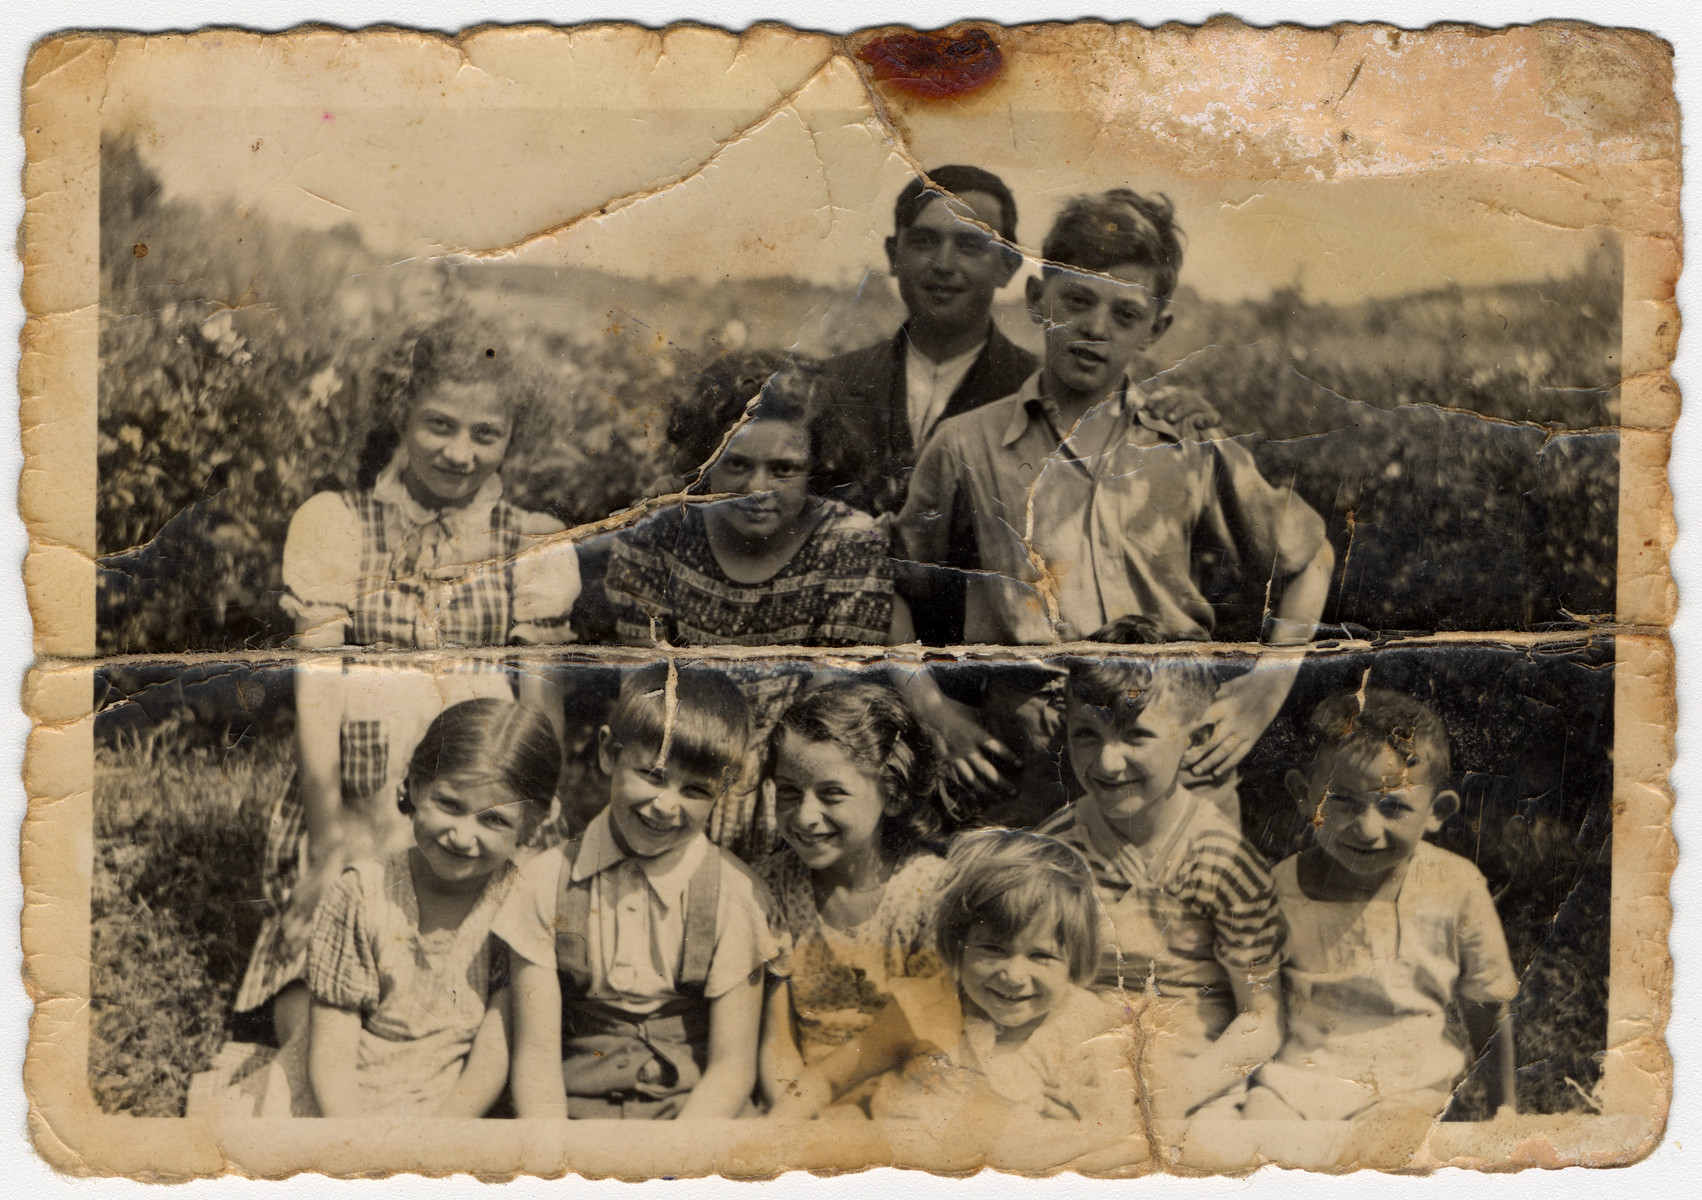 Group portrait of children in Tarnow, Poland.

Cesia Honig is pictured in the upper row on the far left.